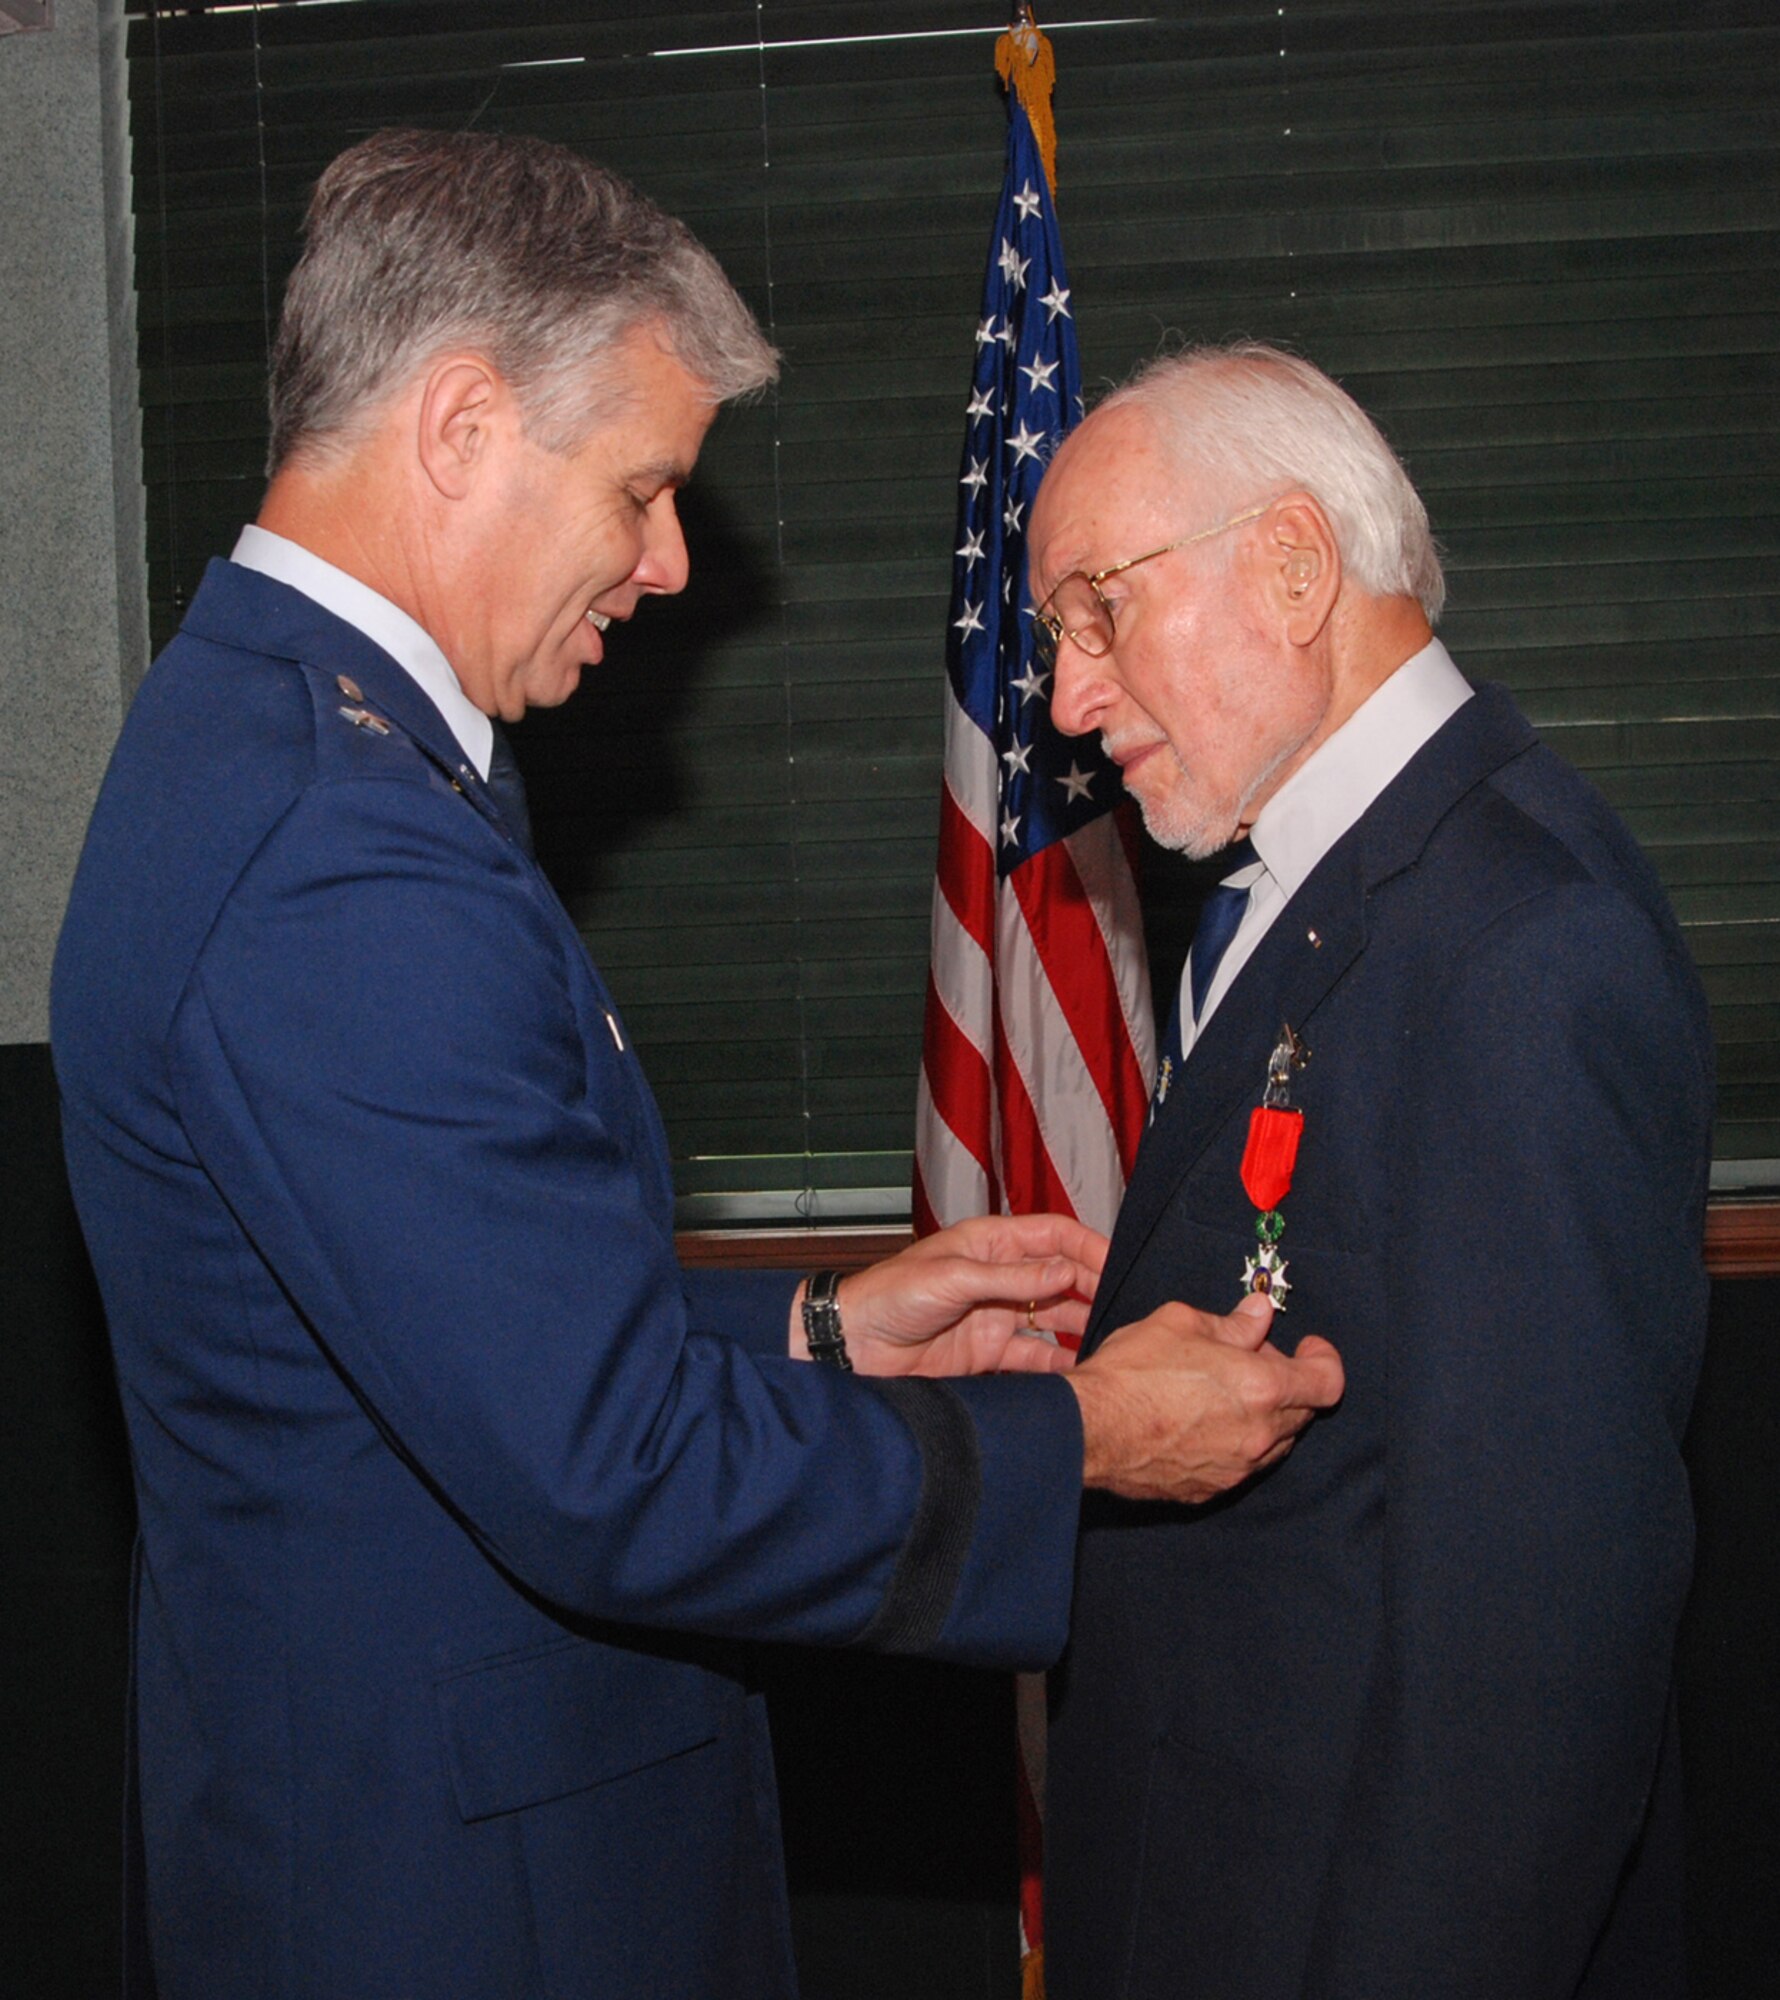 Brig. Gen. Walter Givhan presents retired Air Force Col. Byron Lee Schatzley with the Knight of the Legion of Honor medal July 13 at Wright-Patterson Air Force Base, Ohio. Colonel Schatzley was recognized for his service as bombardier in the 558th Bomb Squadron during World War II.  Napolean Bonaparte created the medal to honor military and non-military people for outstanding bravery or achievement in service to France.  General Givhan is Air Force Institute of Technology Commandant and presented the medal on behalf of the Consulate General of France in Chicago. (U.S. Air Force photo/Bonnie White)